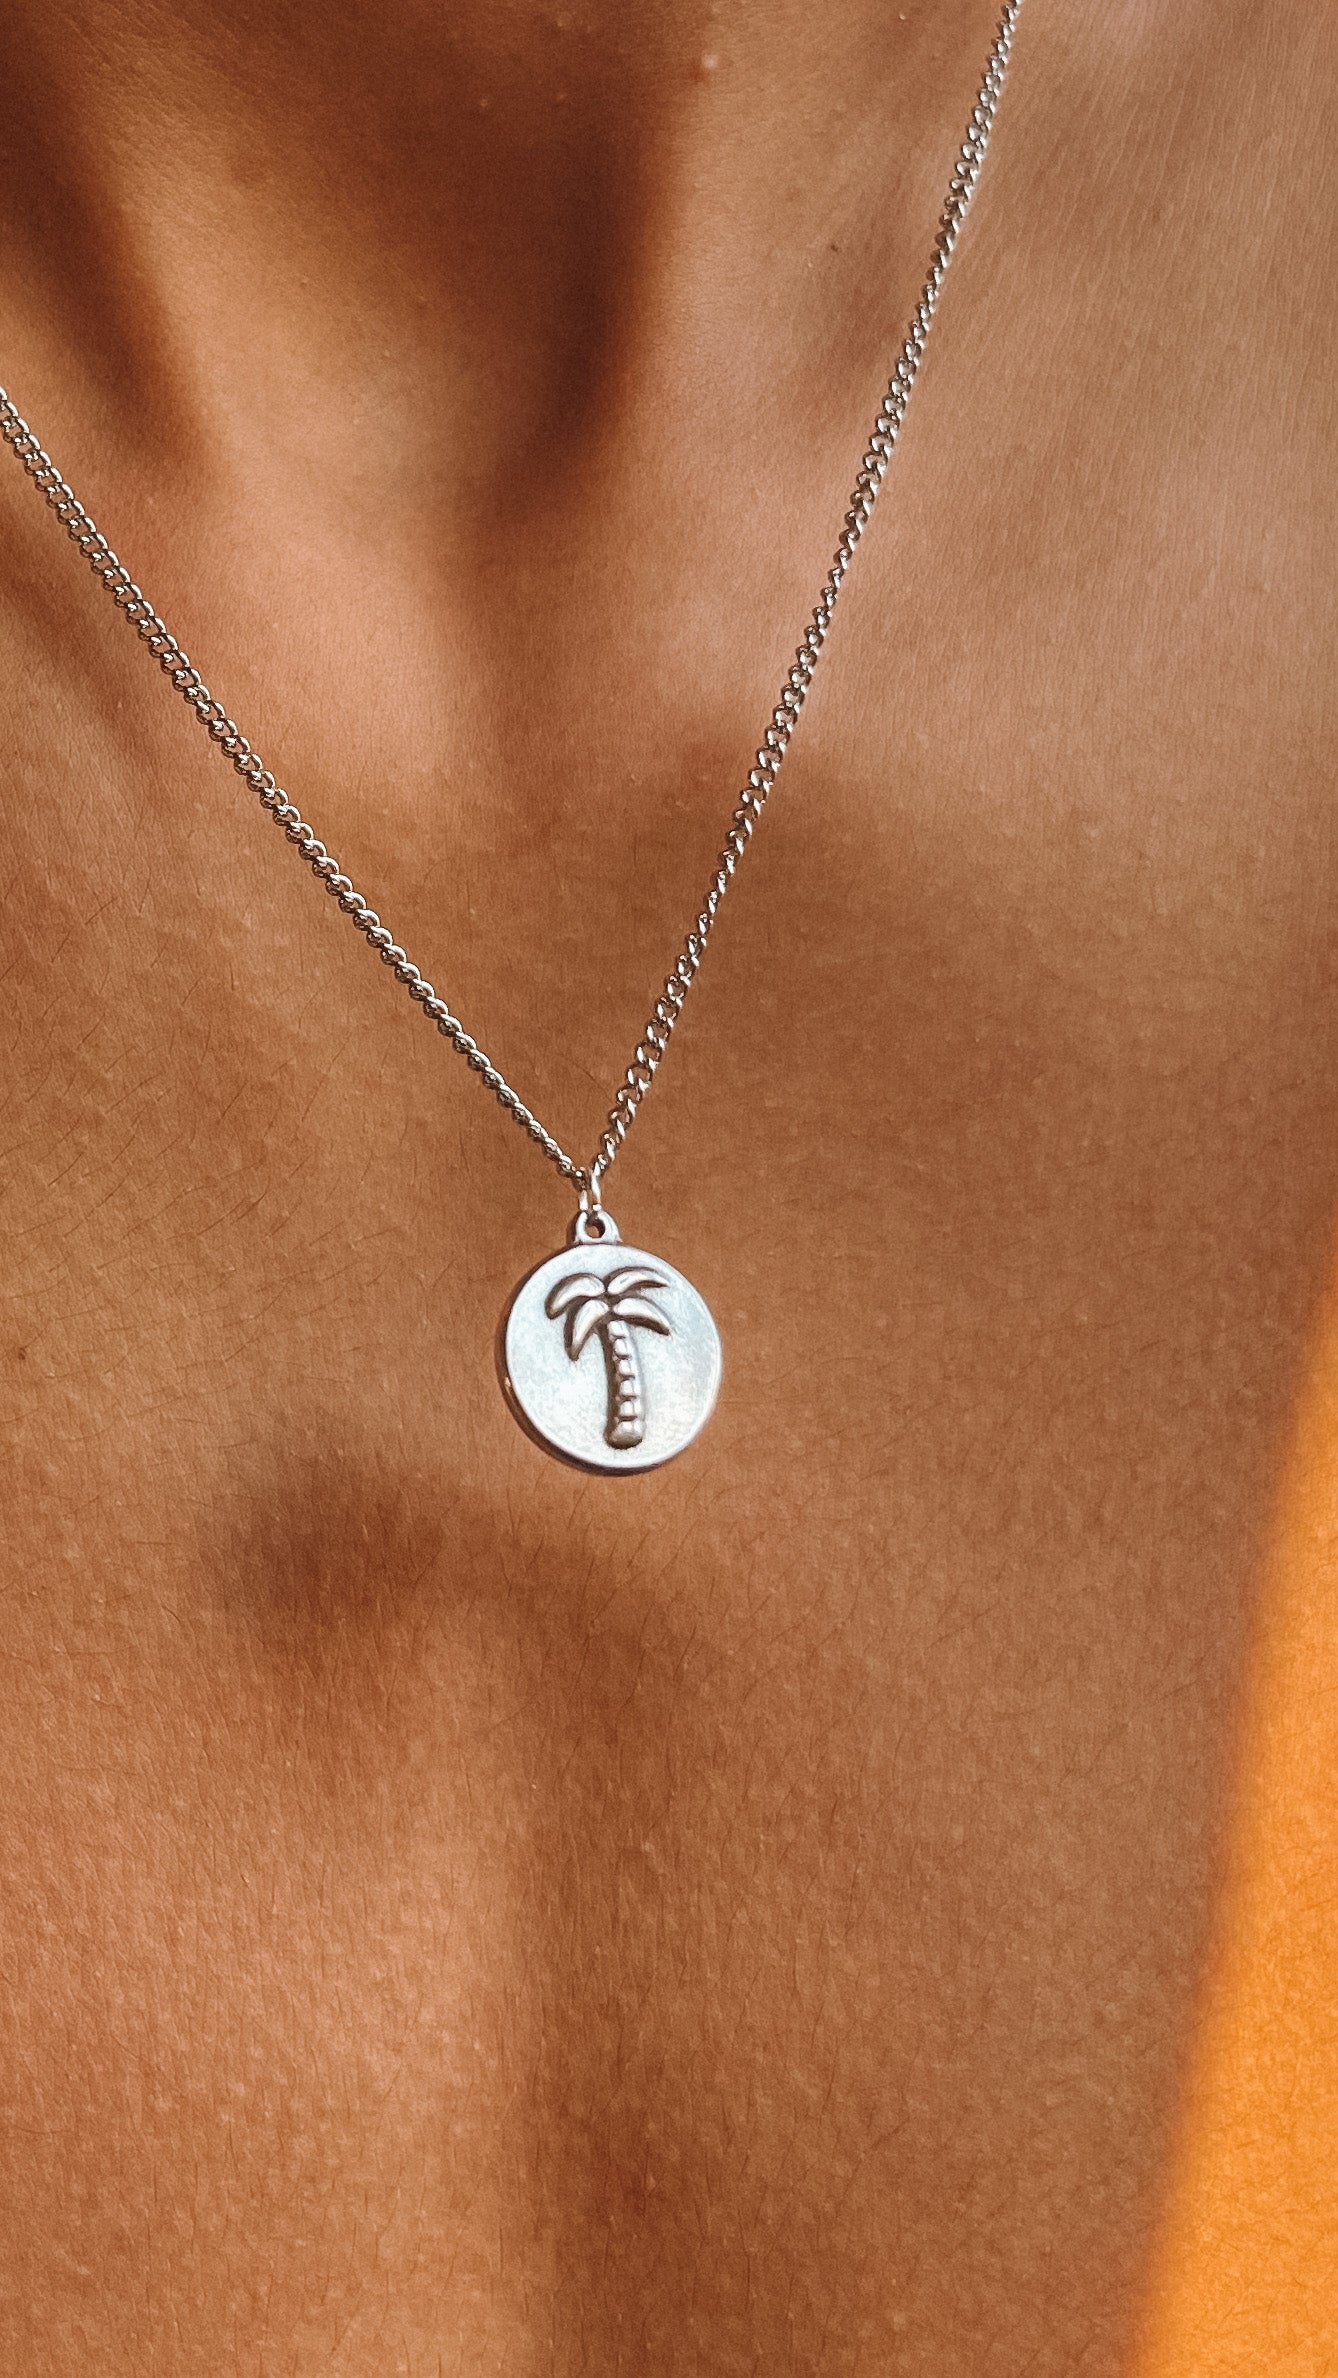 Palm tree silver necklace NowMen